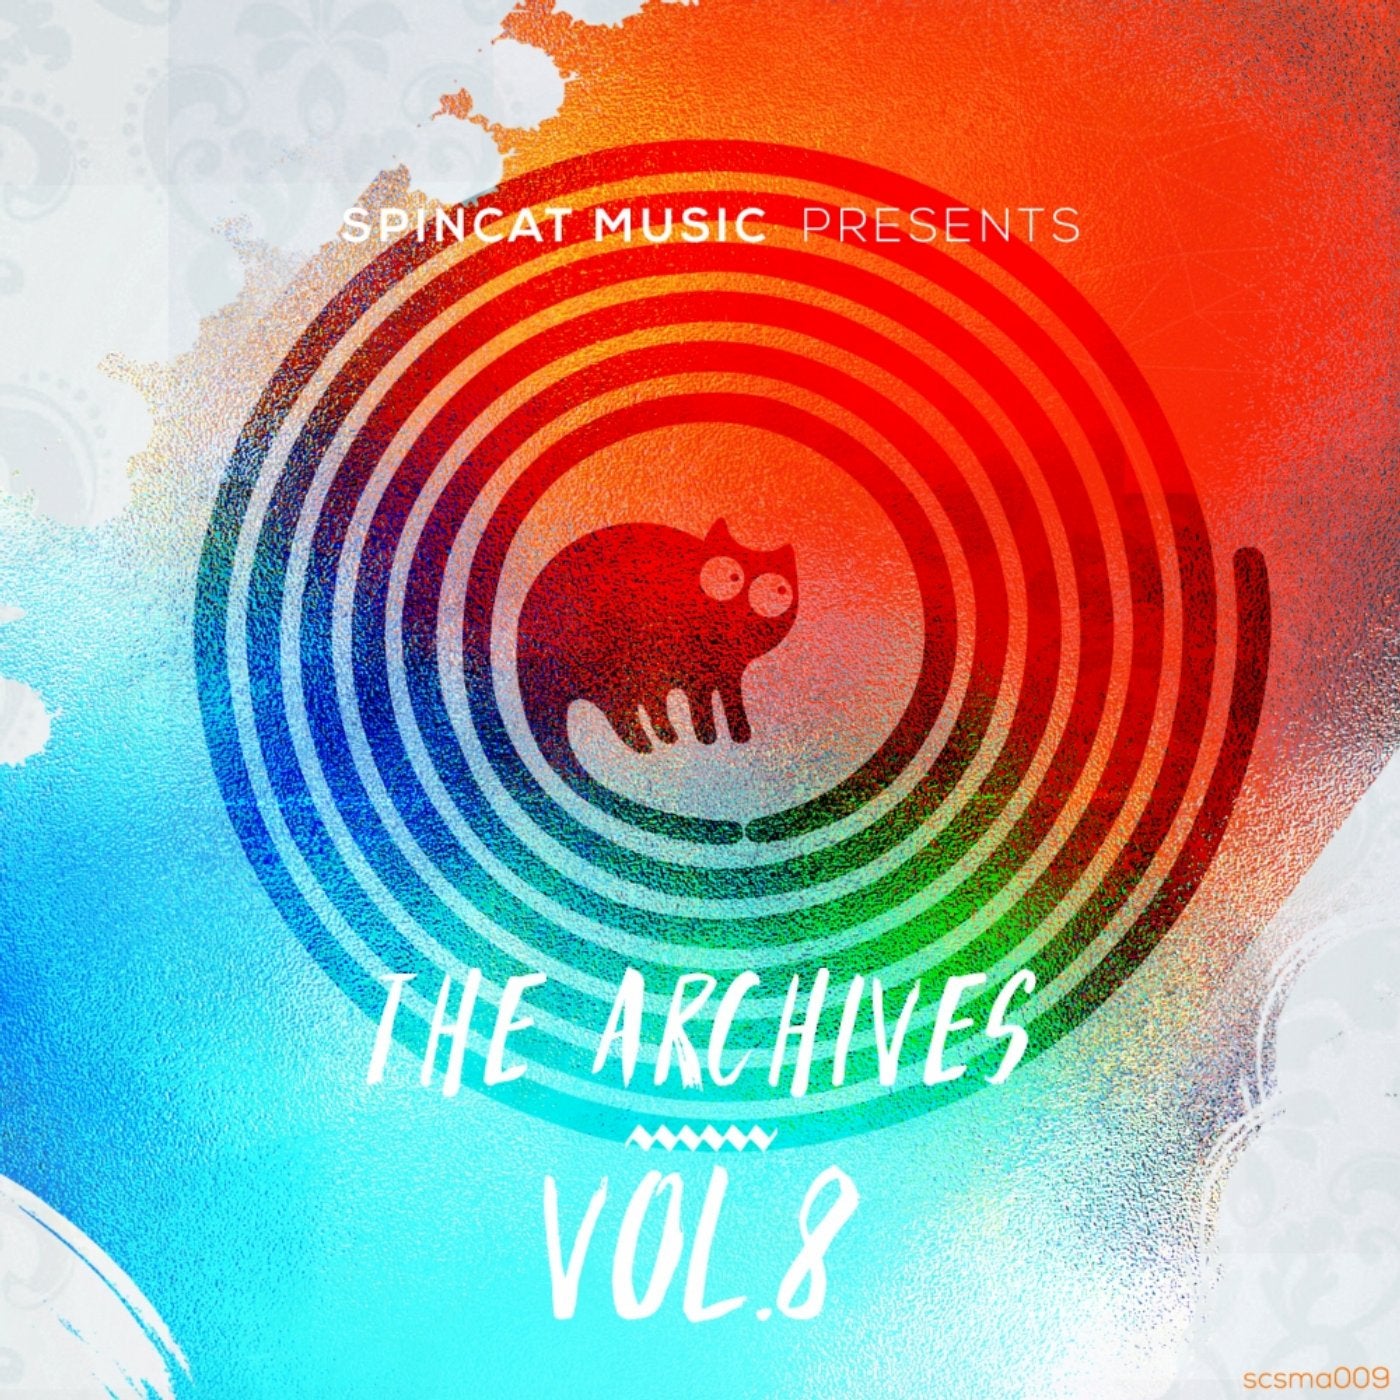 The Archives, Vol. 8